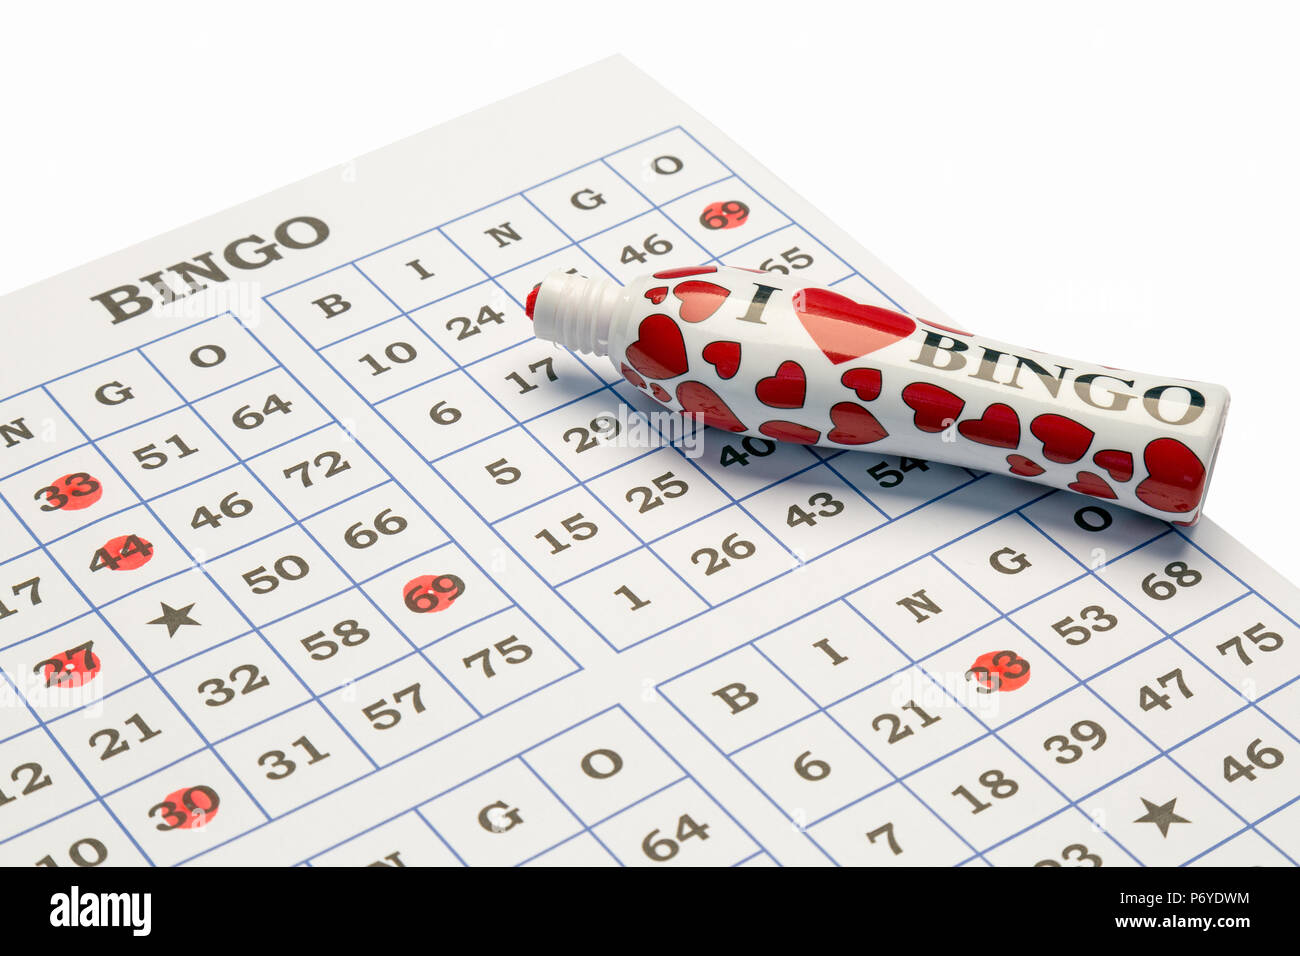 I love Bingo pen and card on a white background. Stock Photo